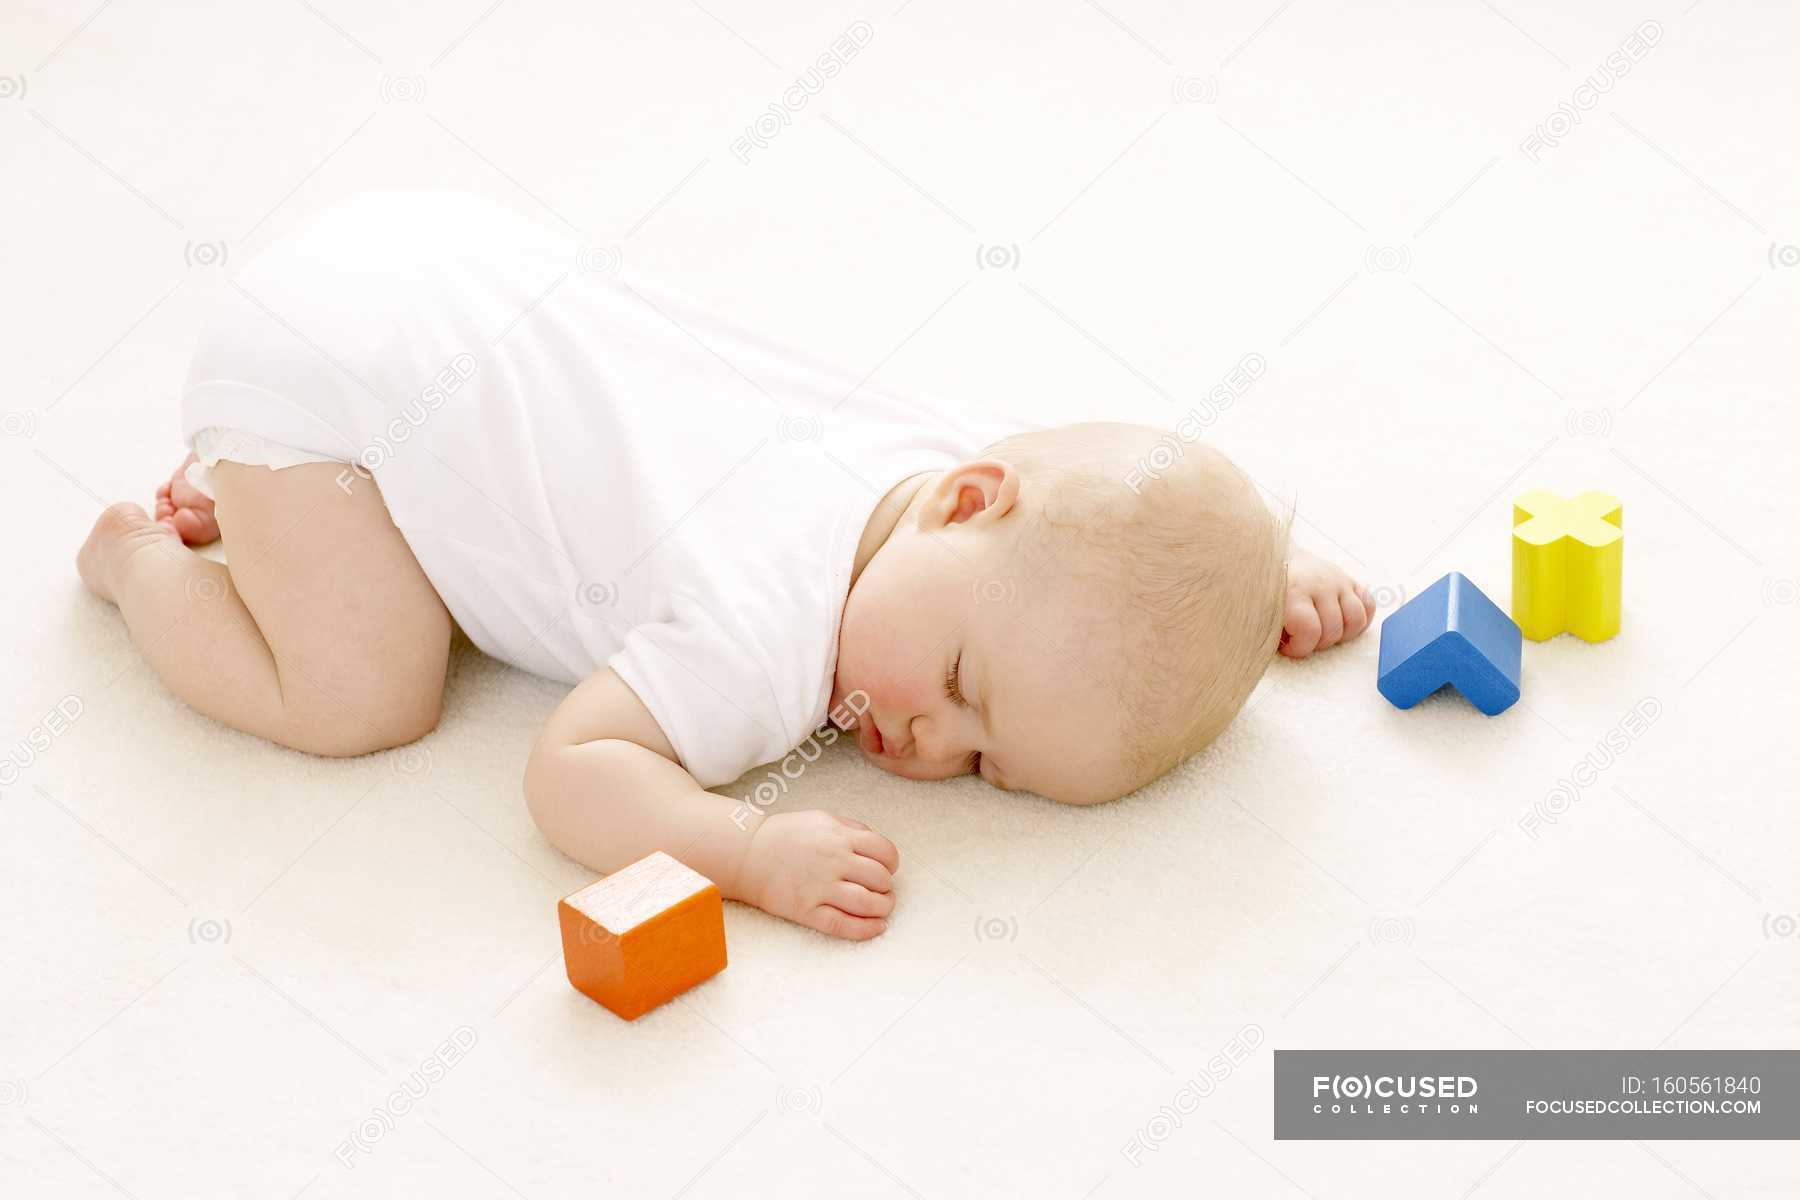 Baby Girl Sleeping On Floor Surrounded By Toy Blocks Childhood